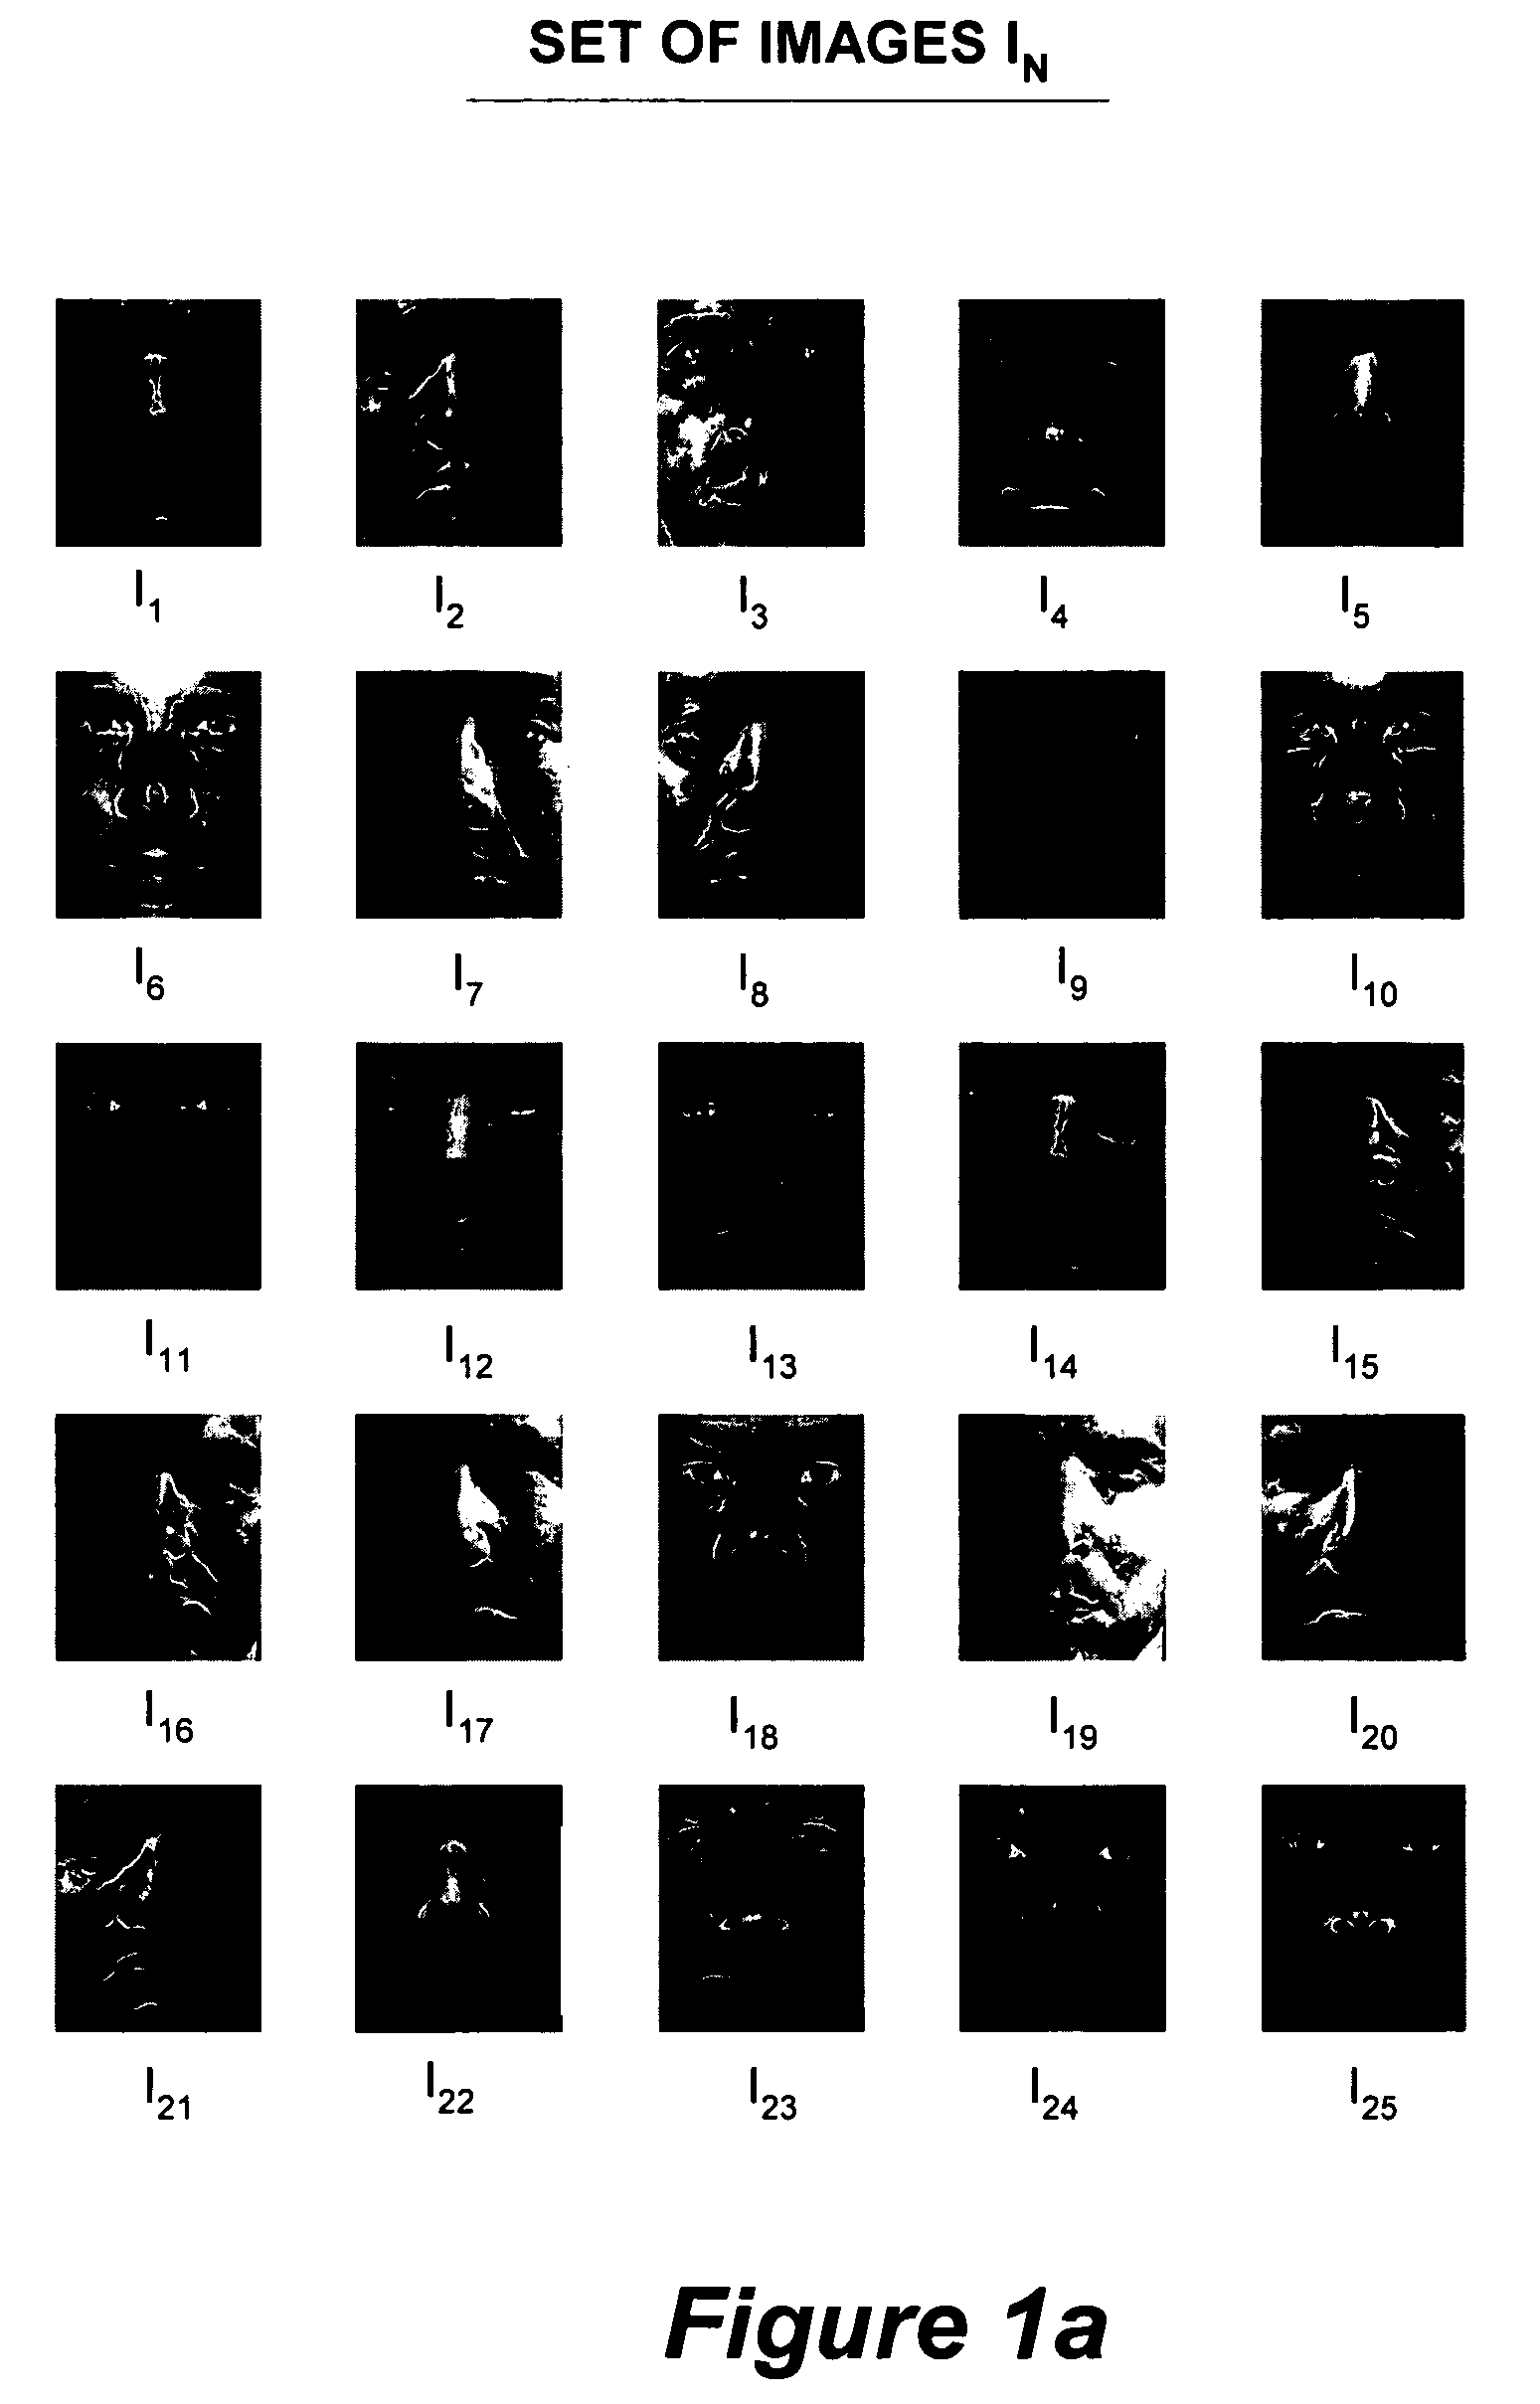 Clustering appearances of objects under varying illumination conditions